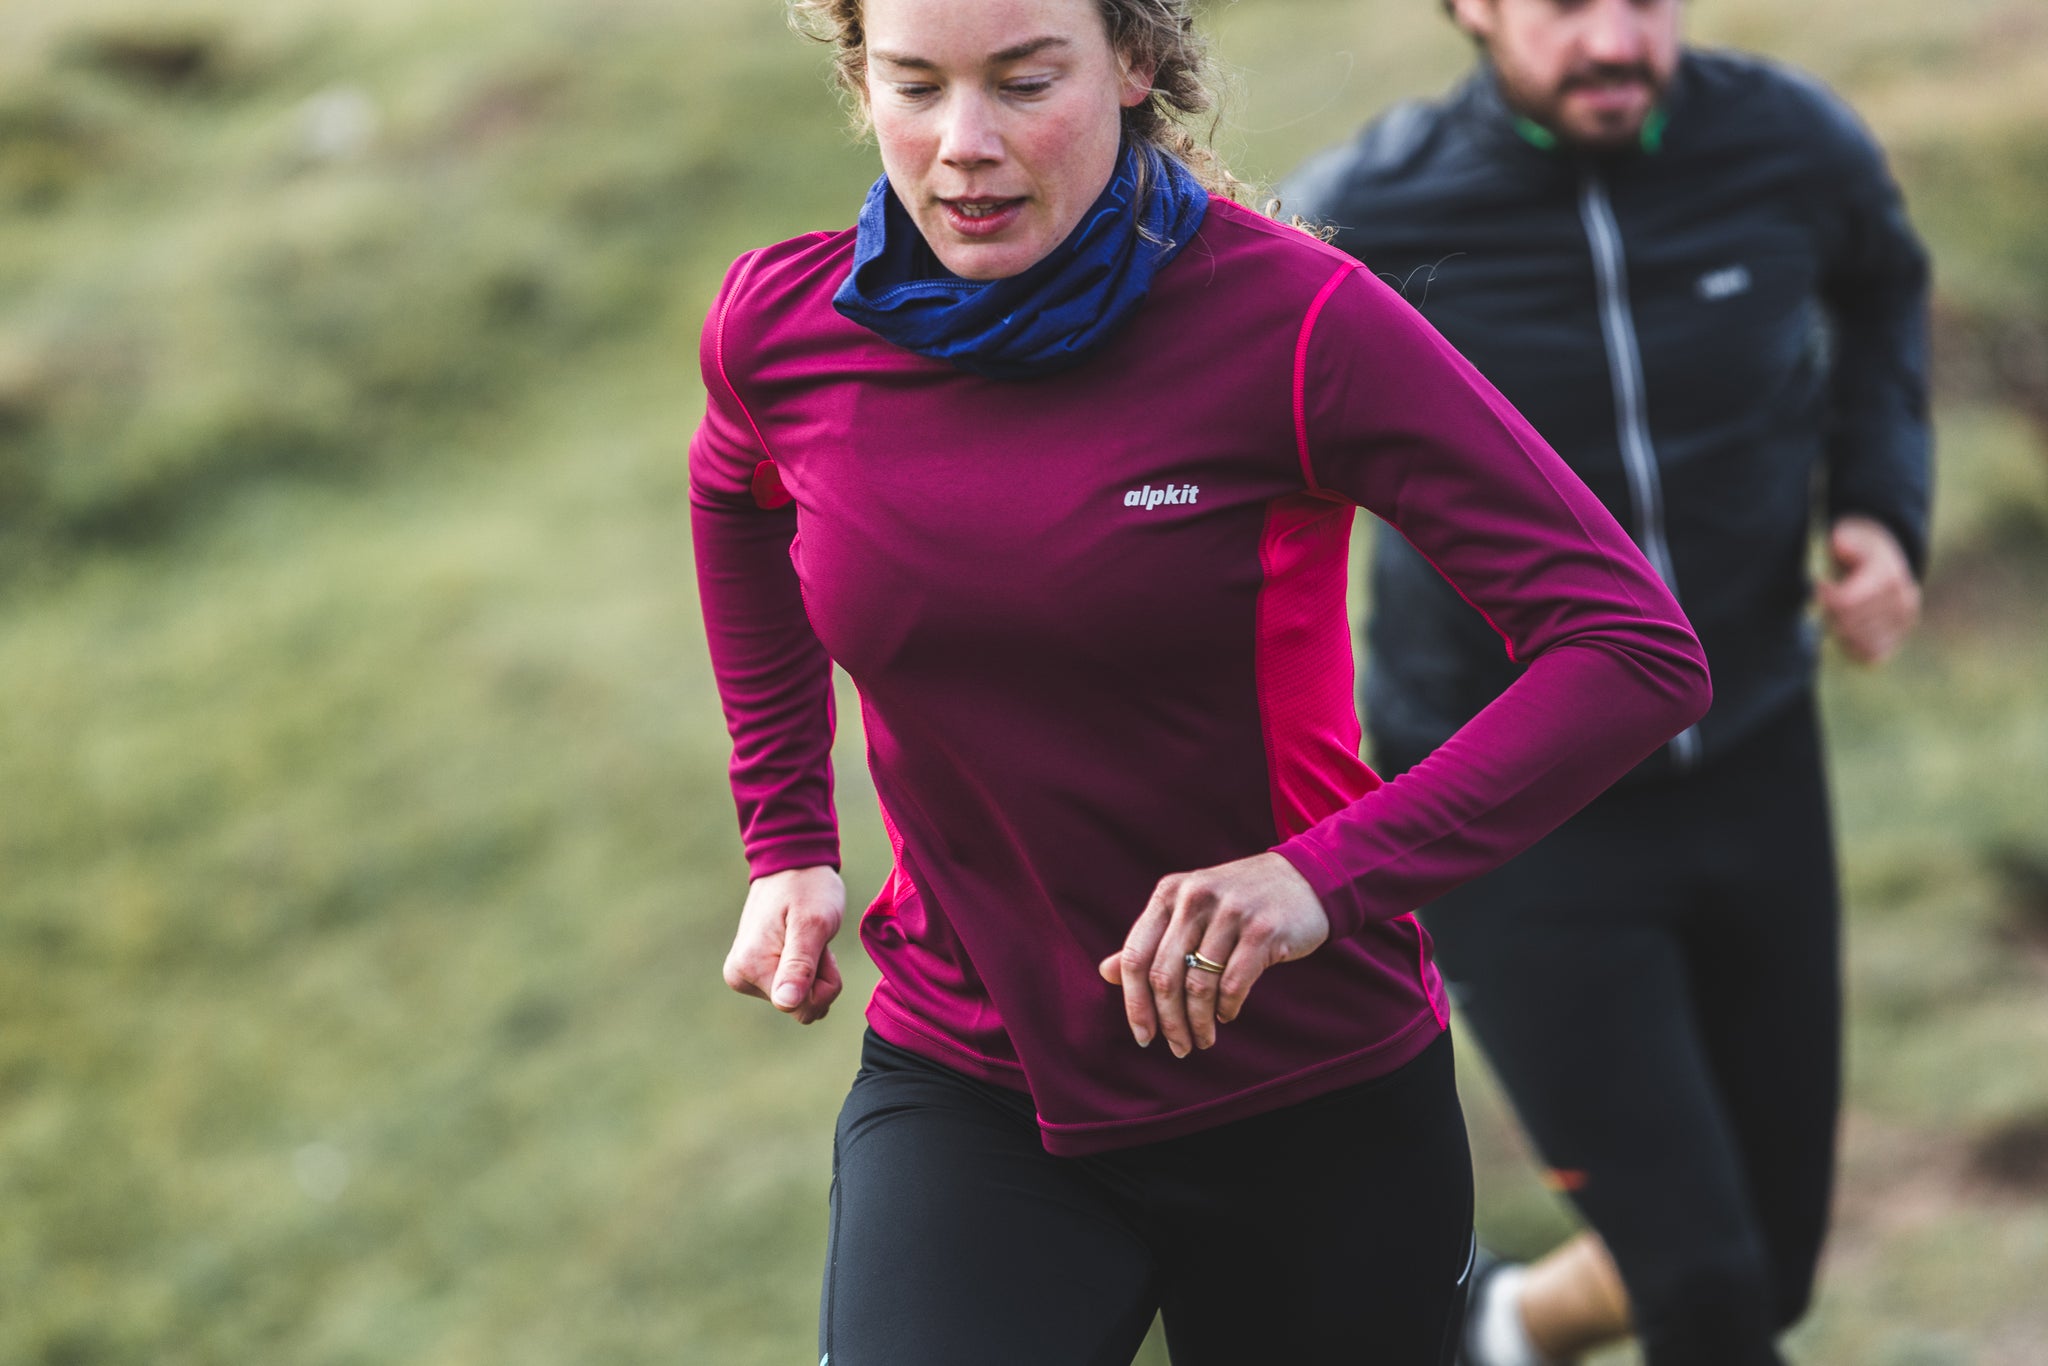 Trail Running Gear Guide - The Ultimate Checklist